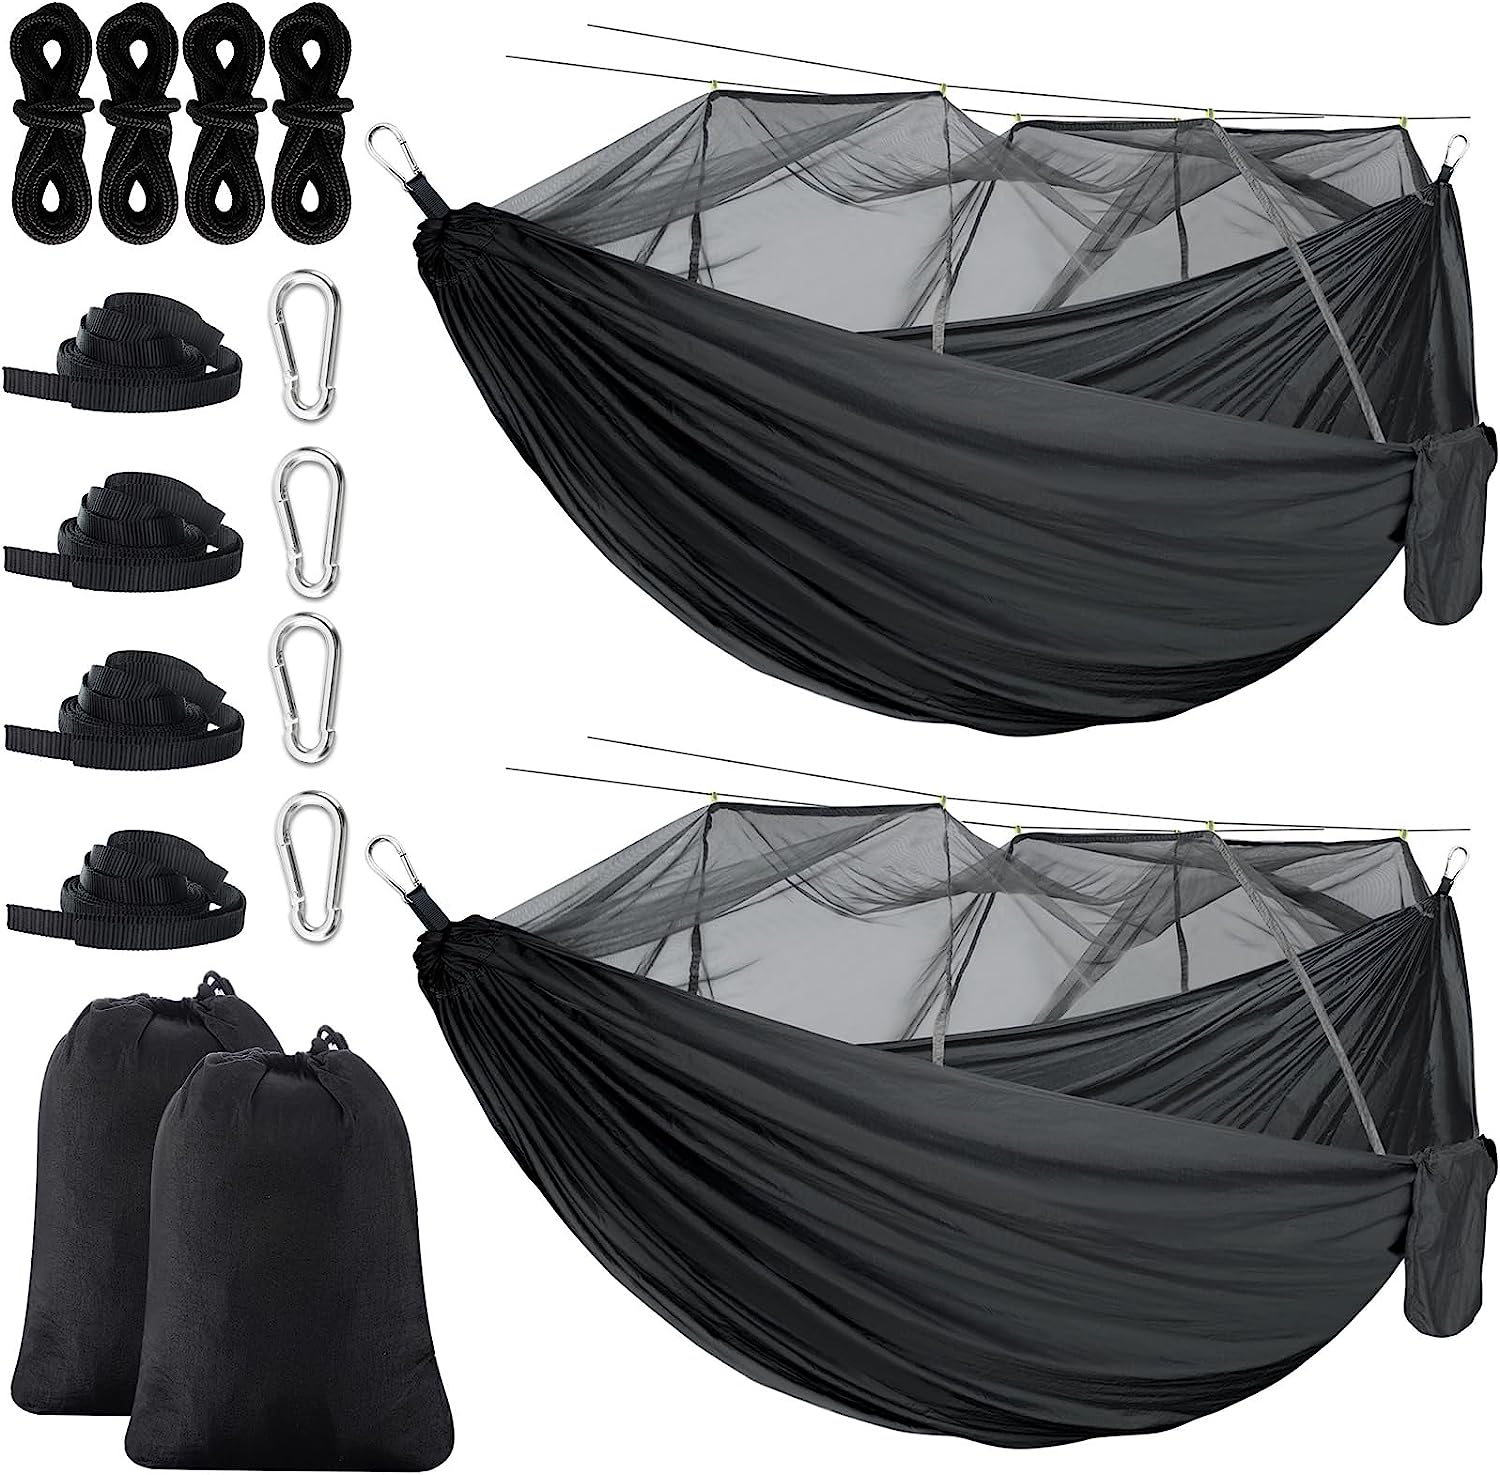 Panelee 2 Pcs Camping Hammock with Mosquito Net [...]